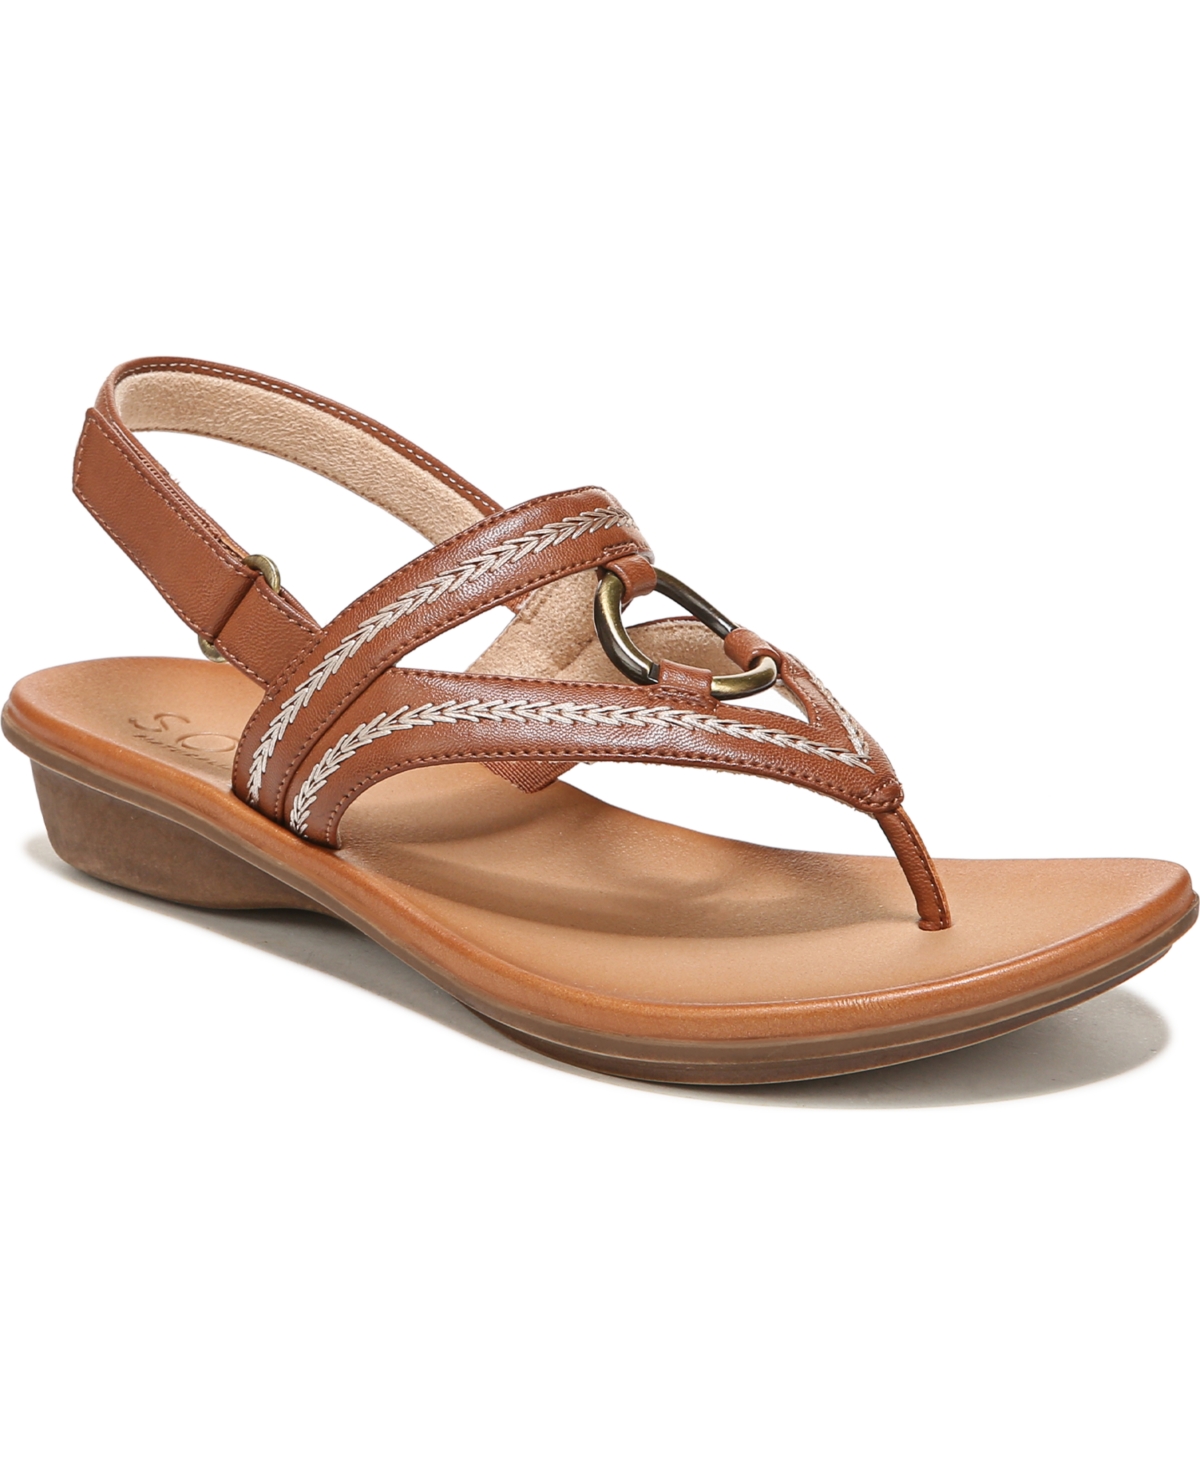 Soul Naturalizer Sunny Flat Sandals Women's Shoes In Toffee Smooth Faux Leather